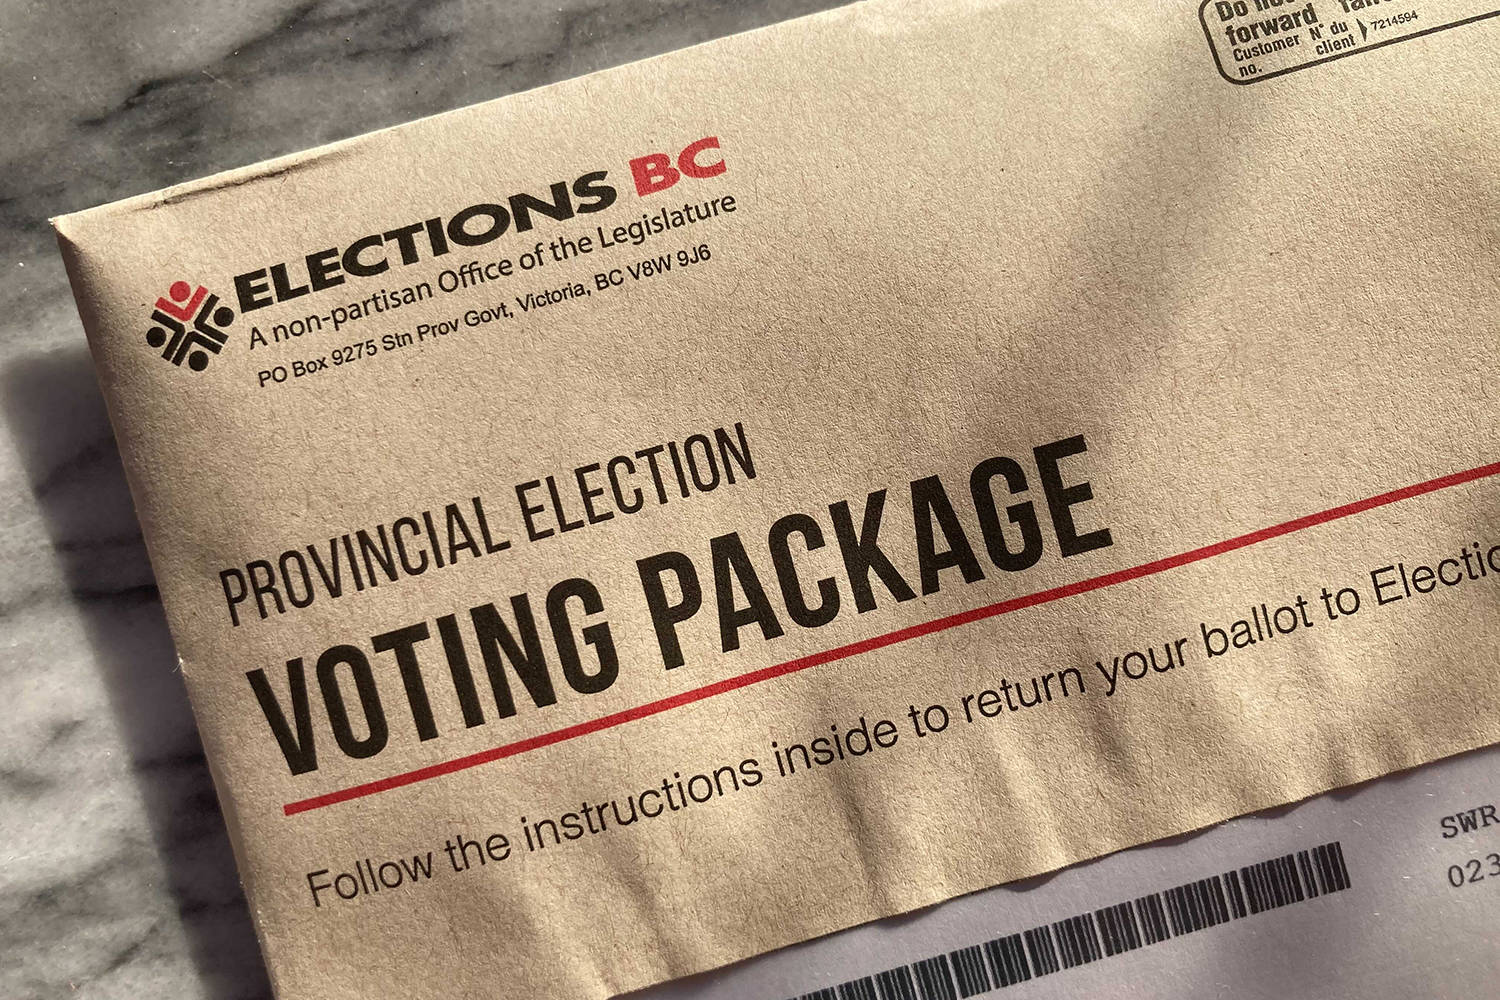 Elections BC has sent out almost 700,000 mail voting packages as of Oct. 14 with just under 3.5 million registered voters. (Black Press Media File)By Oct. 21, Elections BC had received an estimated 396,900 returned vote-by-mail packages. This represents about 55 per cent of packages issued to date. (Black Press Media File)